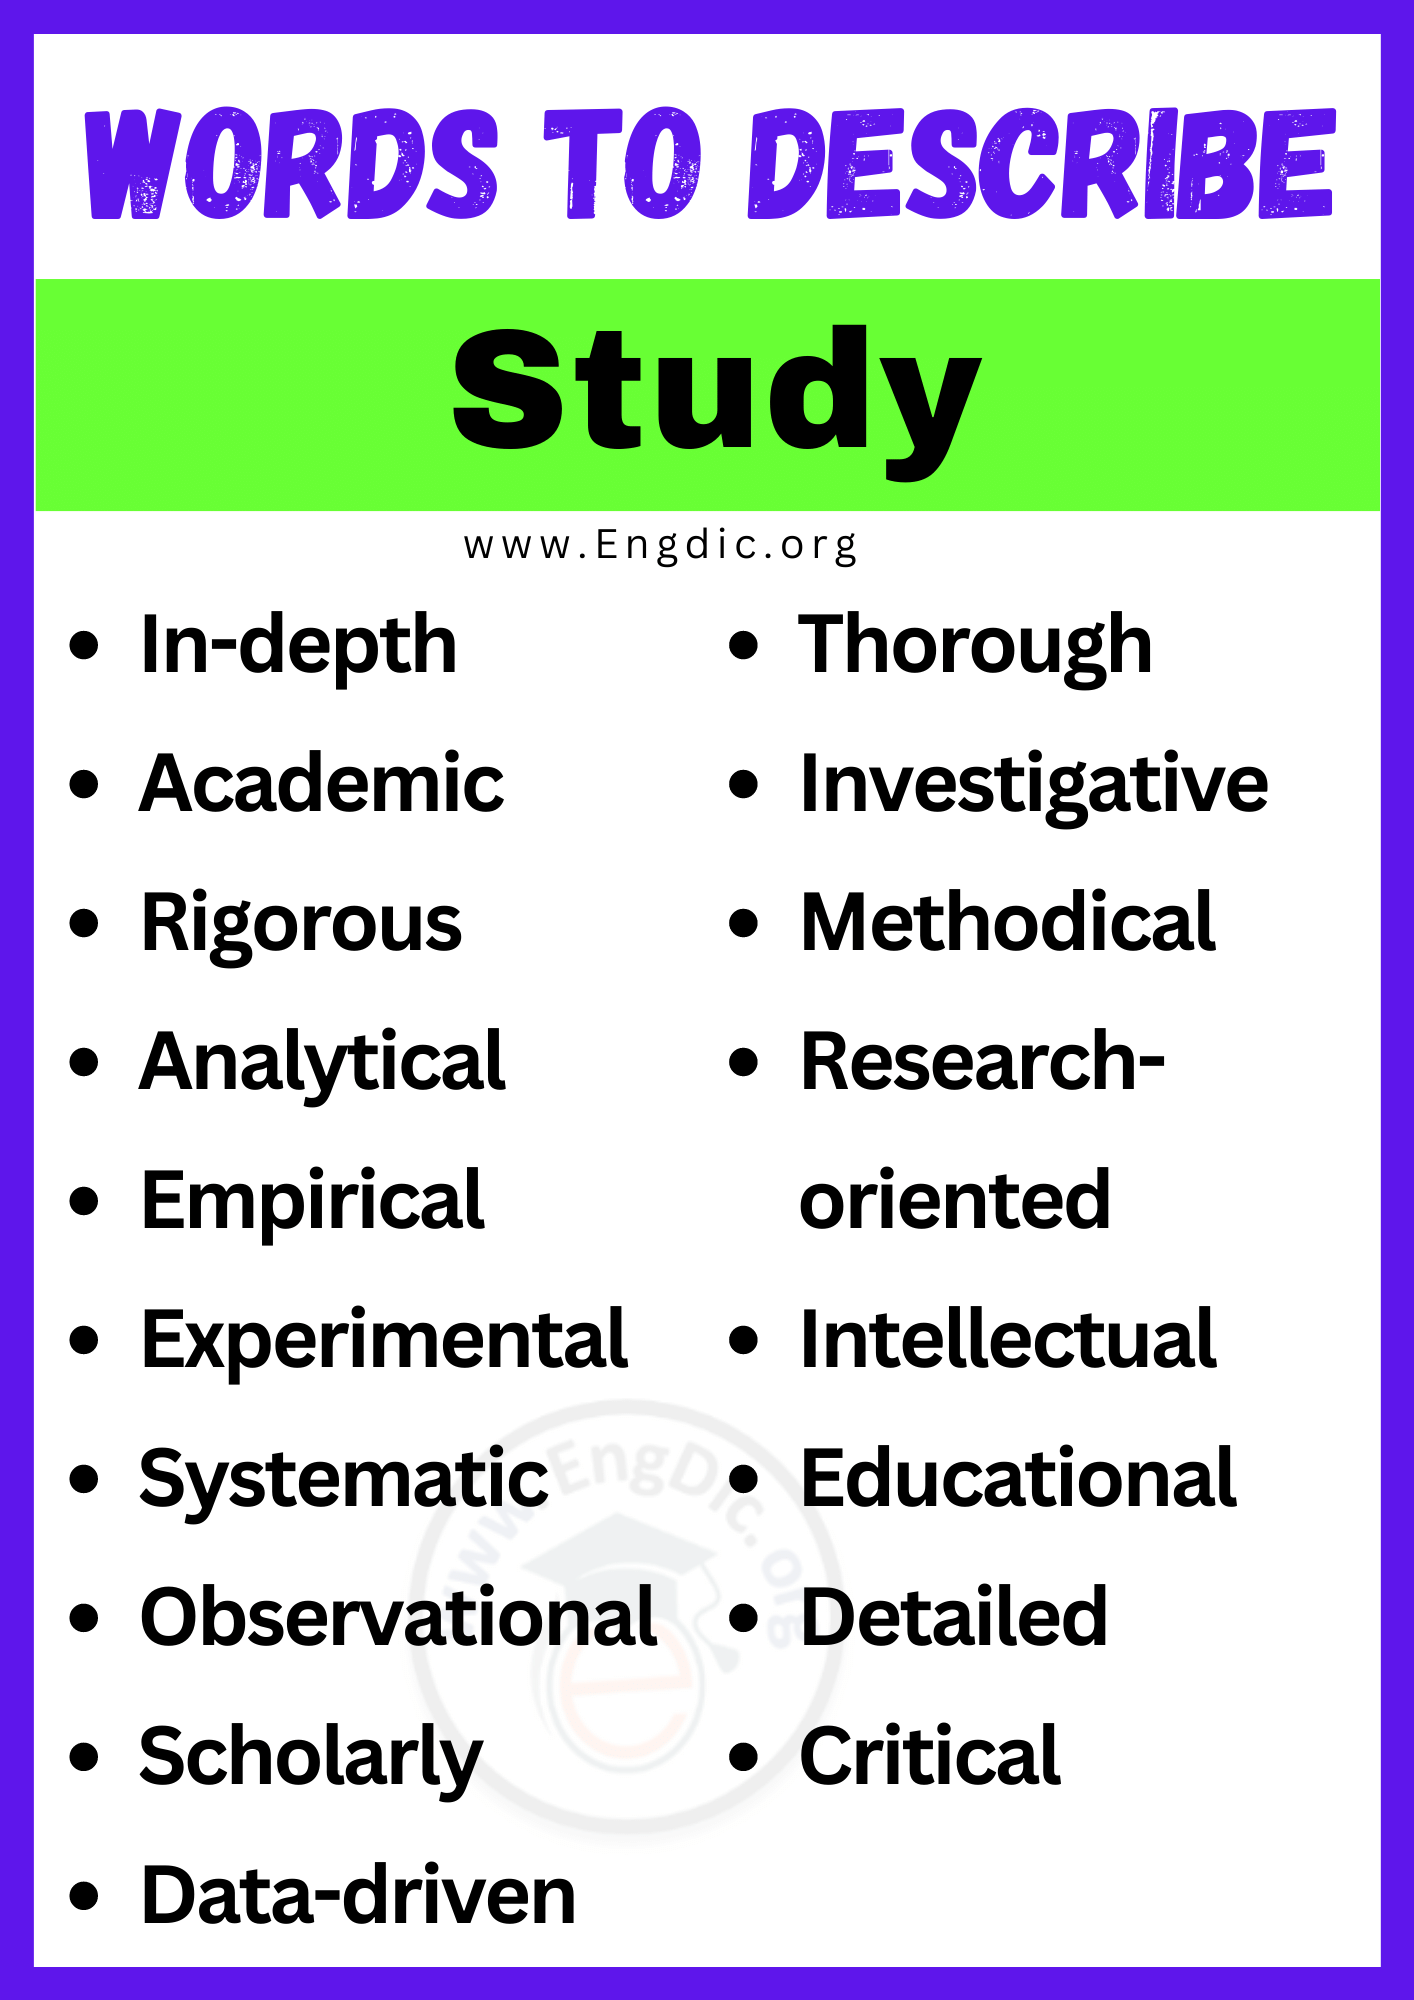 Words to Describe Study